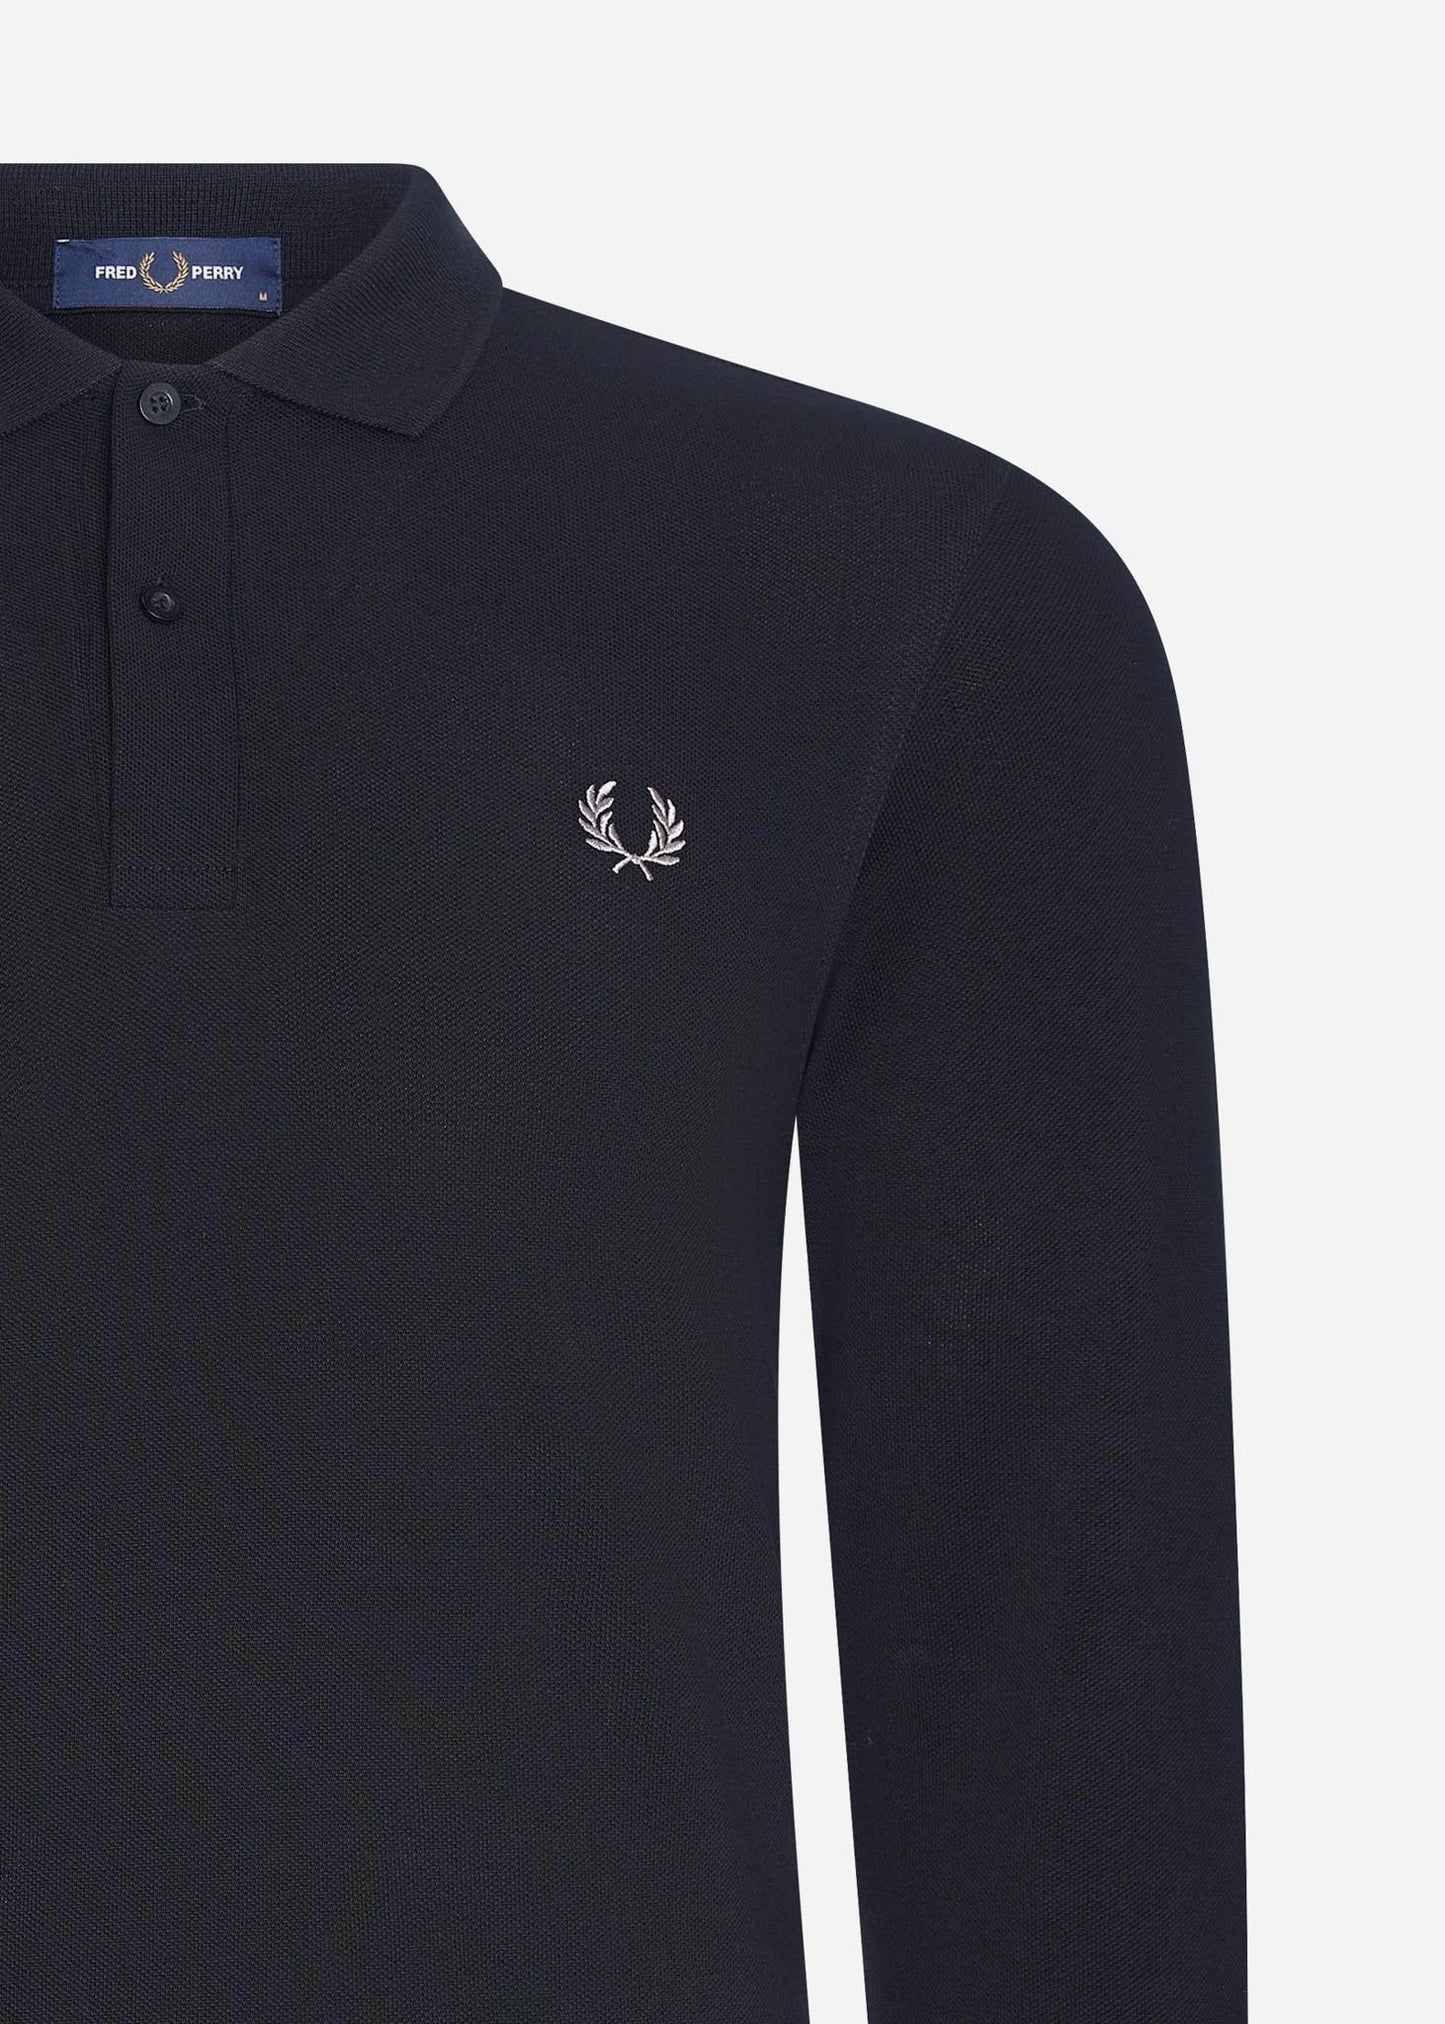 Fred Perry long sleeve polo black zwart